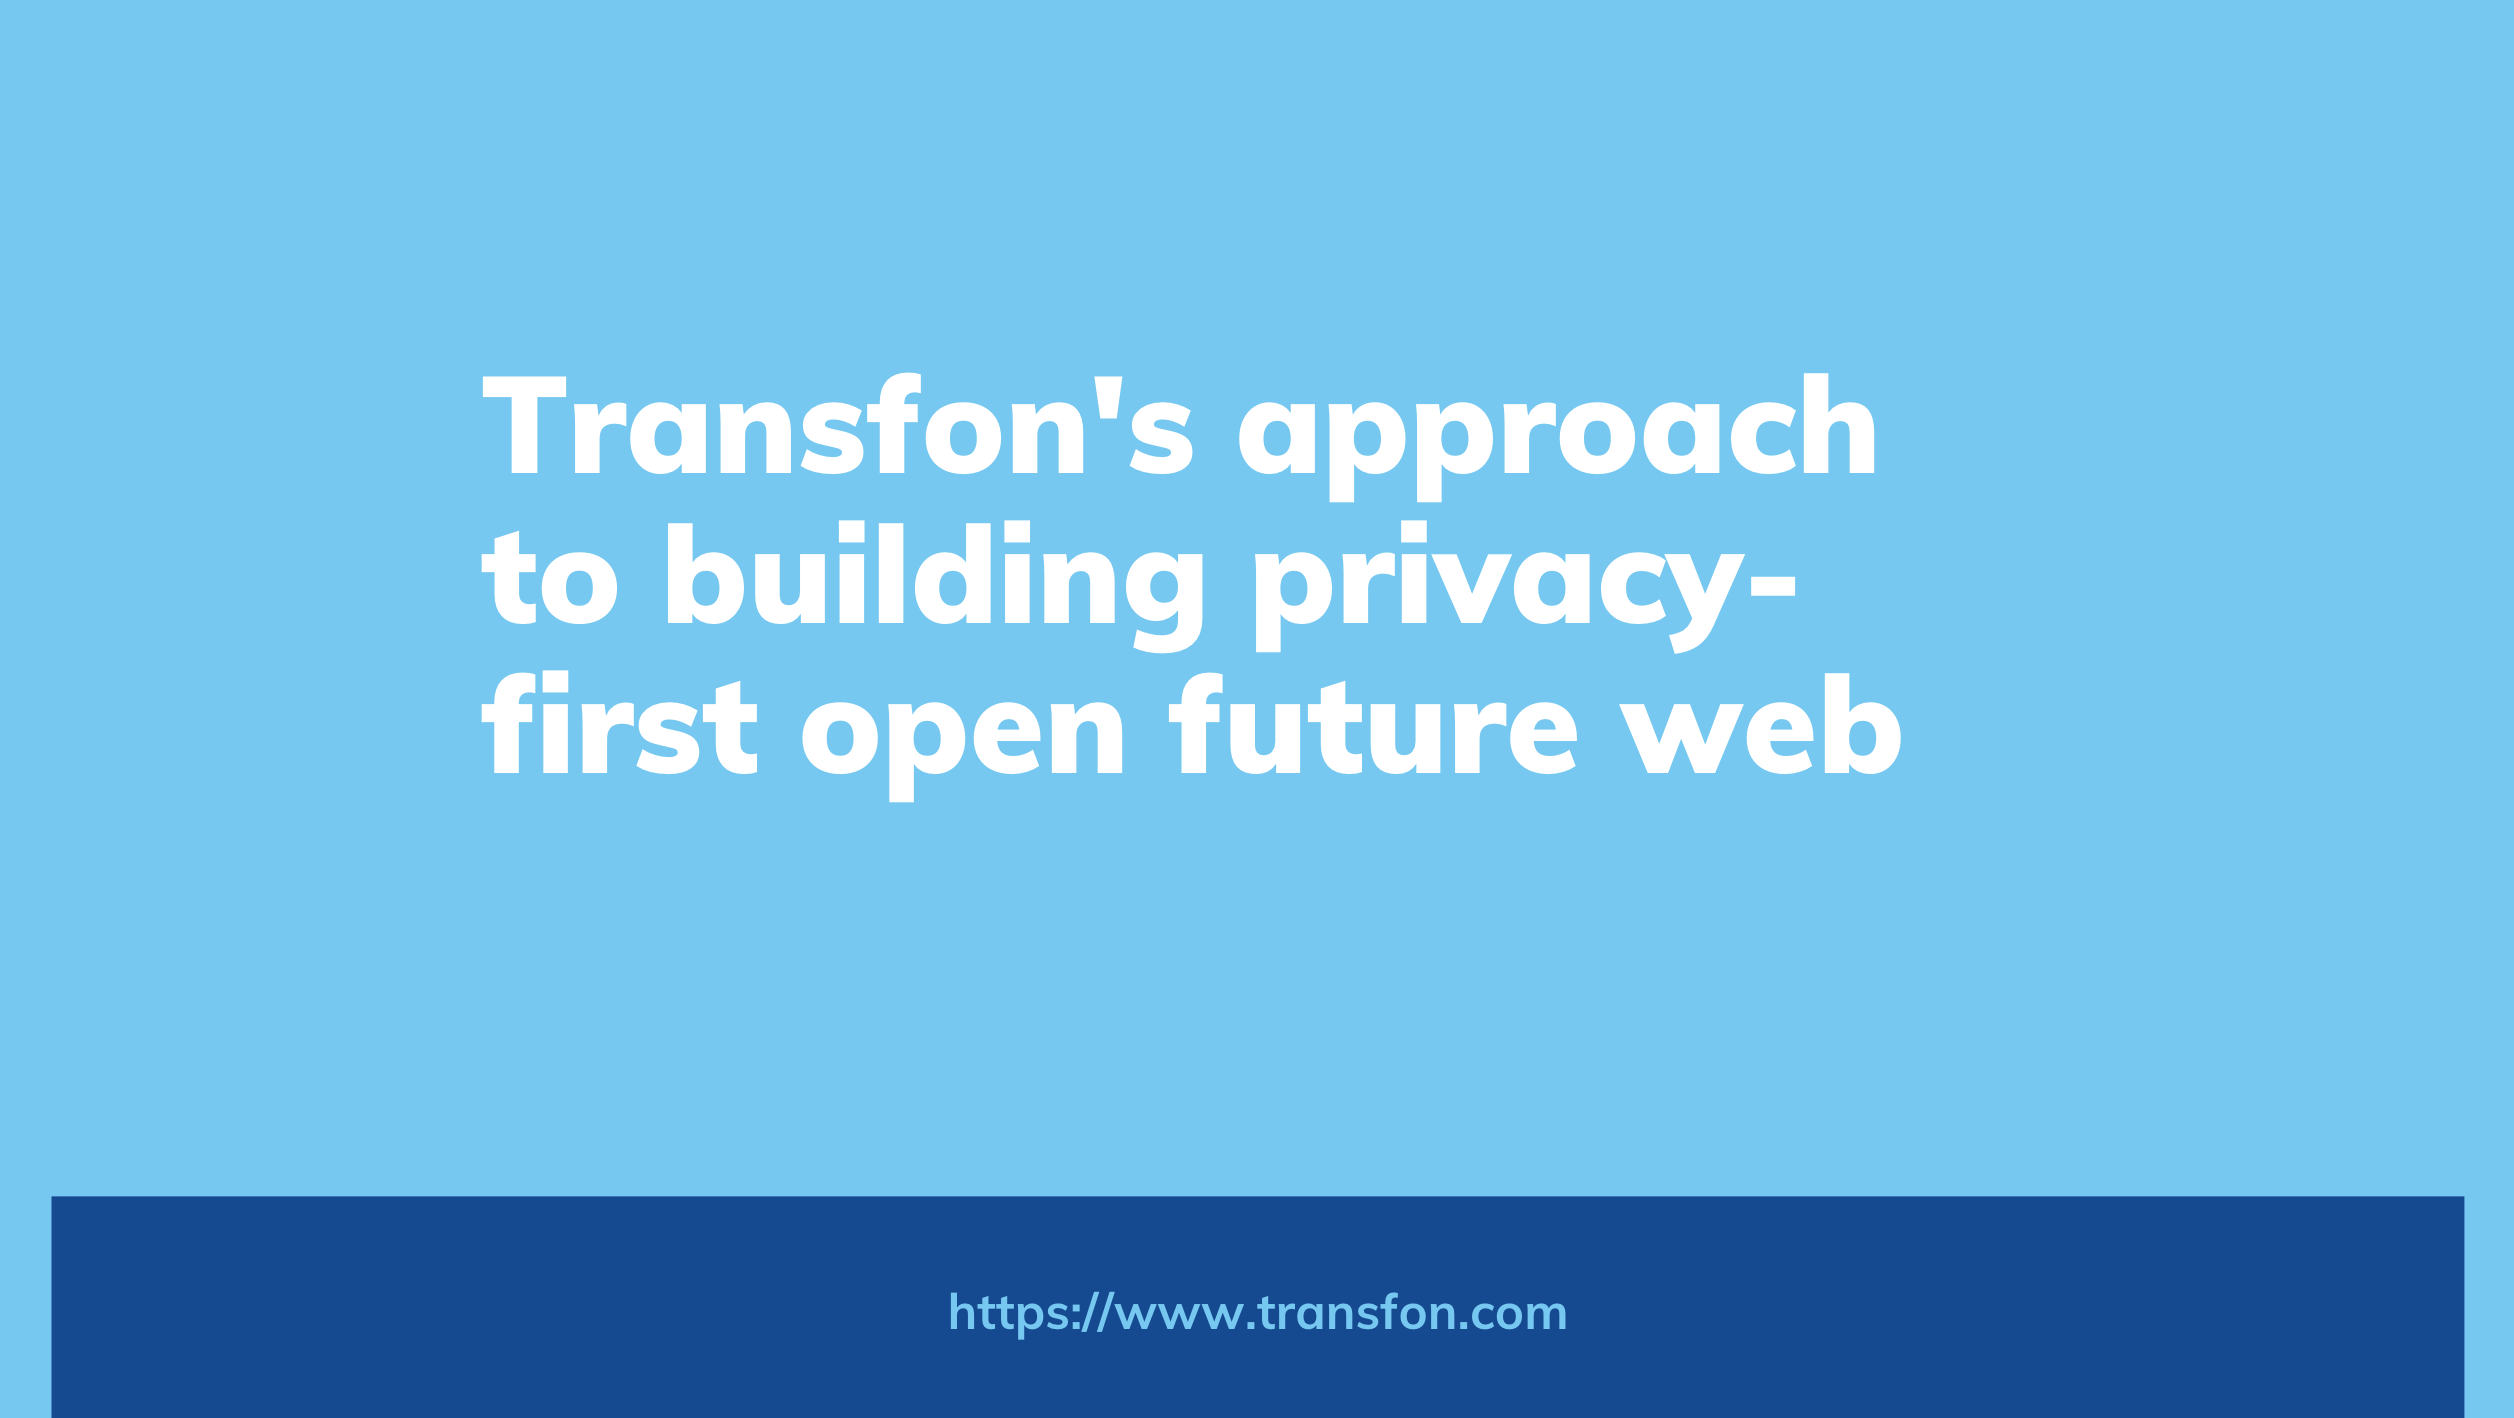 Transfon's approach to building privacy-first future web